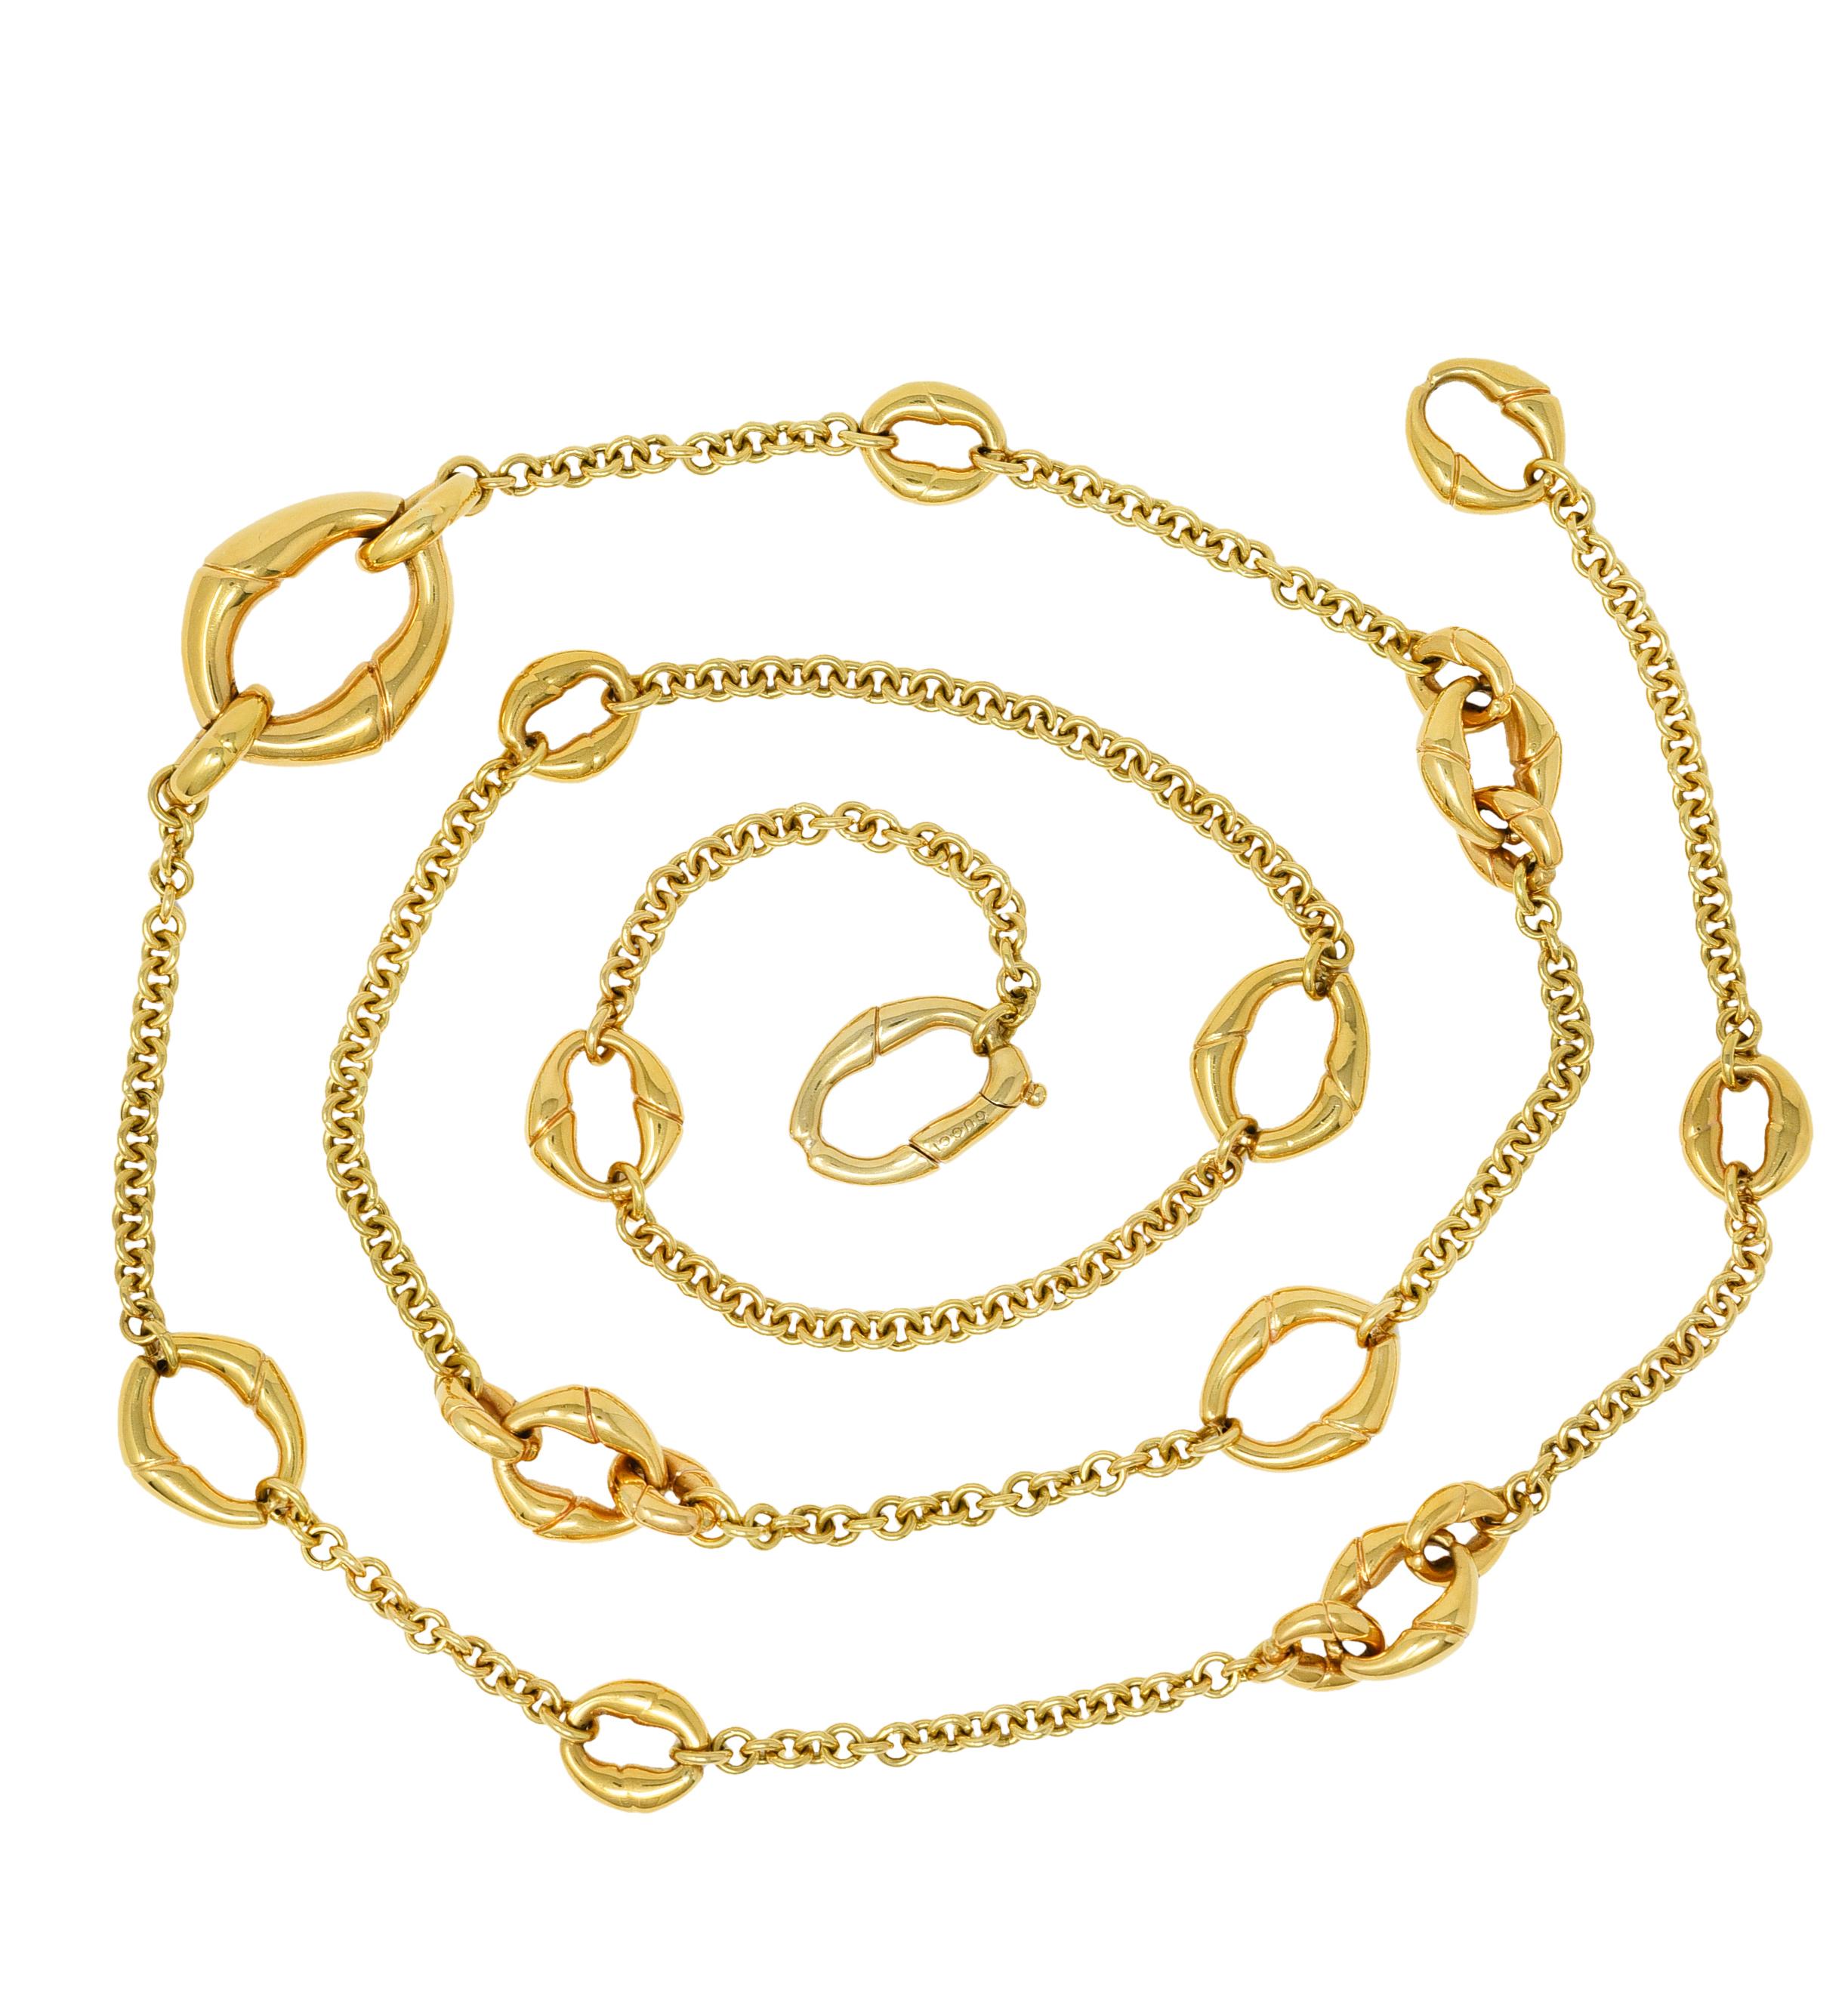 Necklace designed as 3.0 mm cable chain 

Featuring grooved bamboo style oval link stations

Links vary in size from 3/8 x 3/8 inch to 7/8 x 1 inch

Completed by hidden clasp

Stamped 750 for 18 karat gold 

Fully signed Gucci 

Length: 36